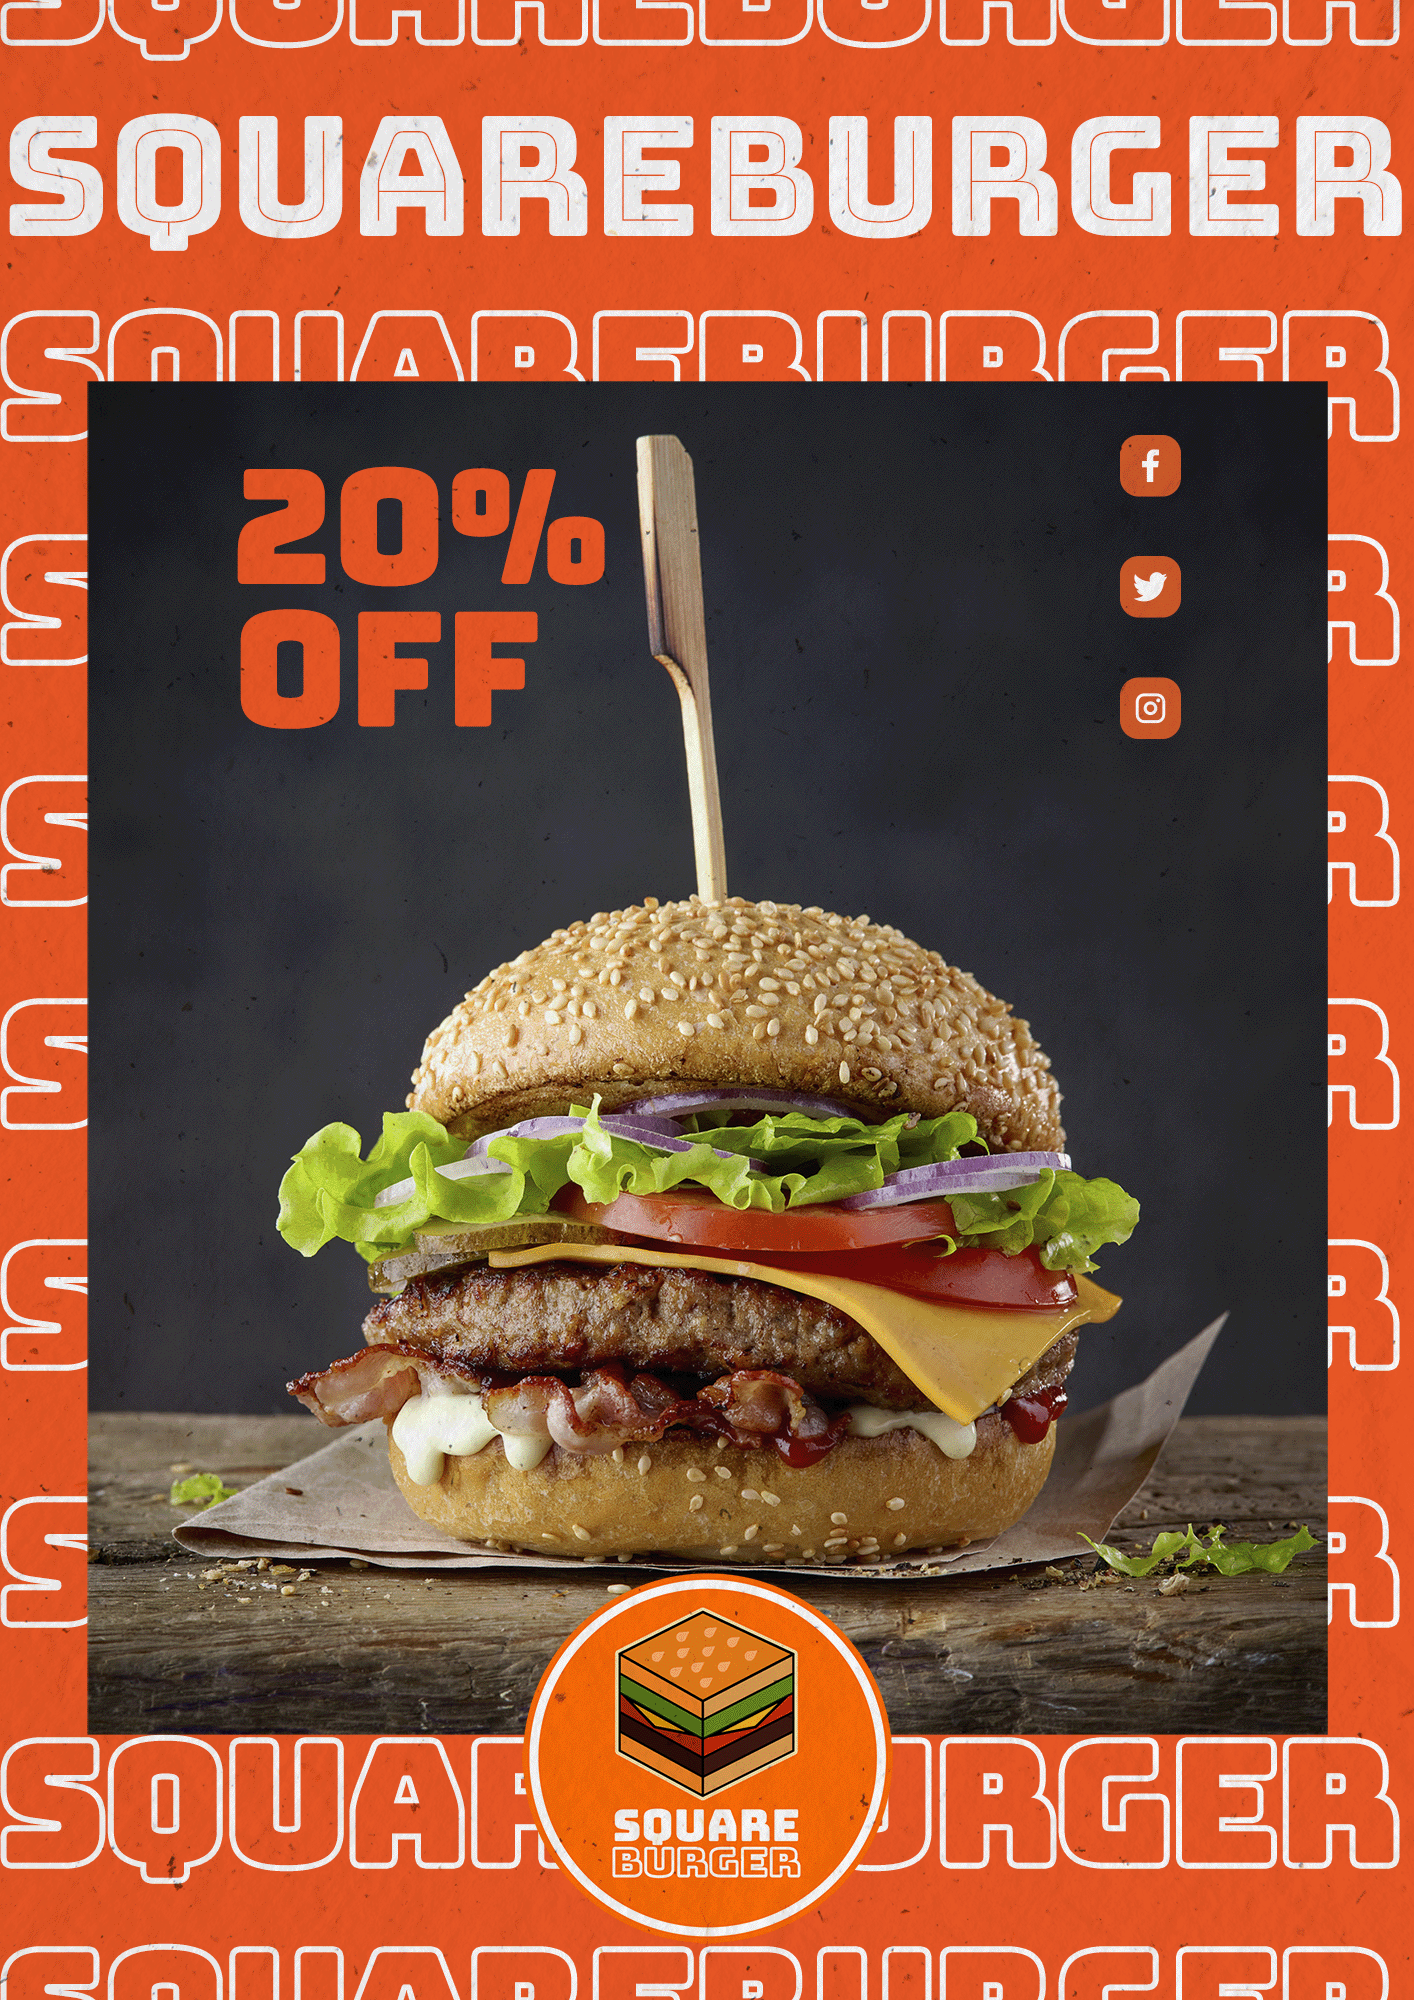 A flyer offering 20% off burgers. Square Burger is prominently displayed down the flyer behind the image of a burger.